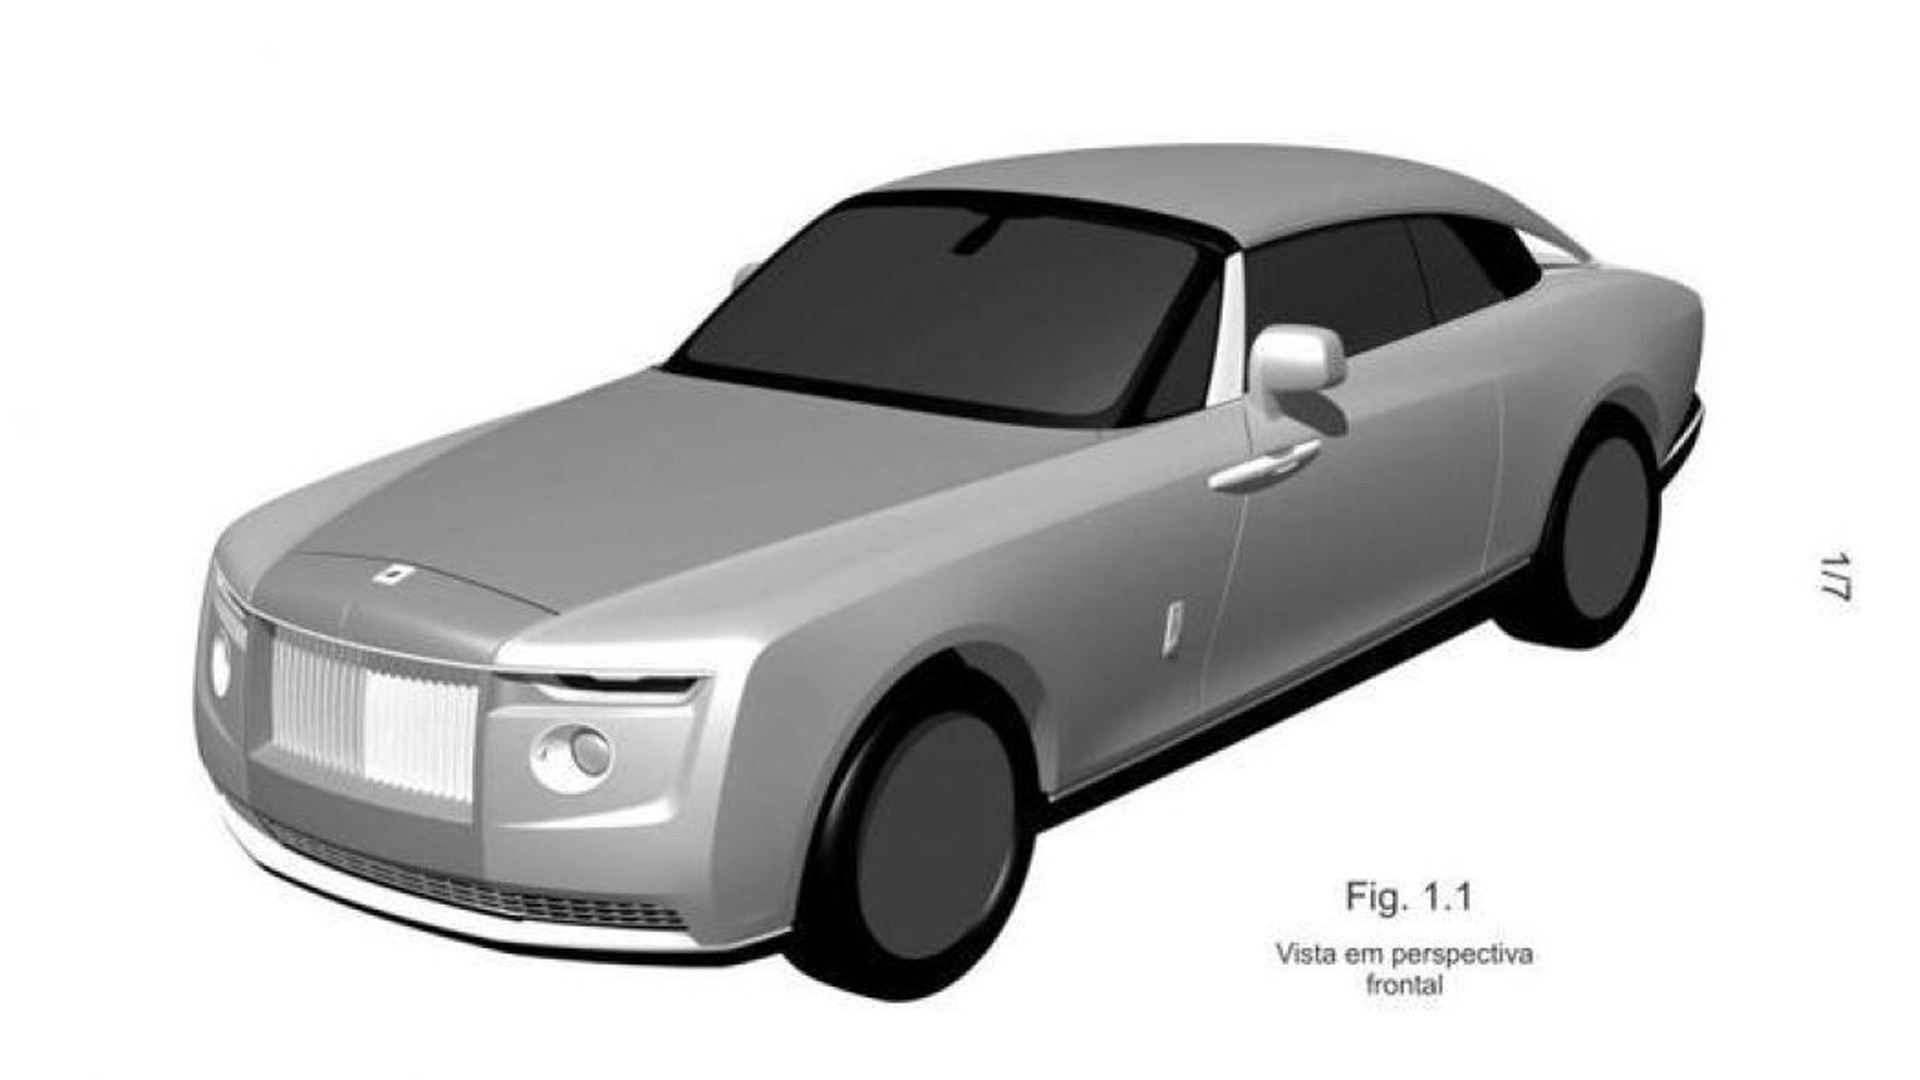 Patent drawings for mystery Rolls-Royce model - Photo credit: Taycan EV Forum